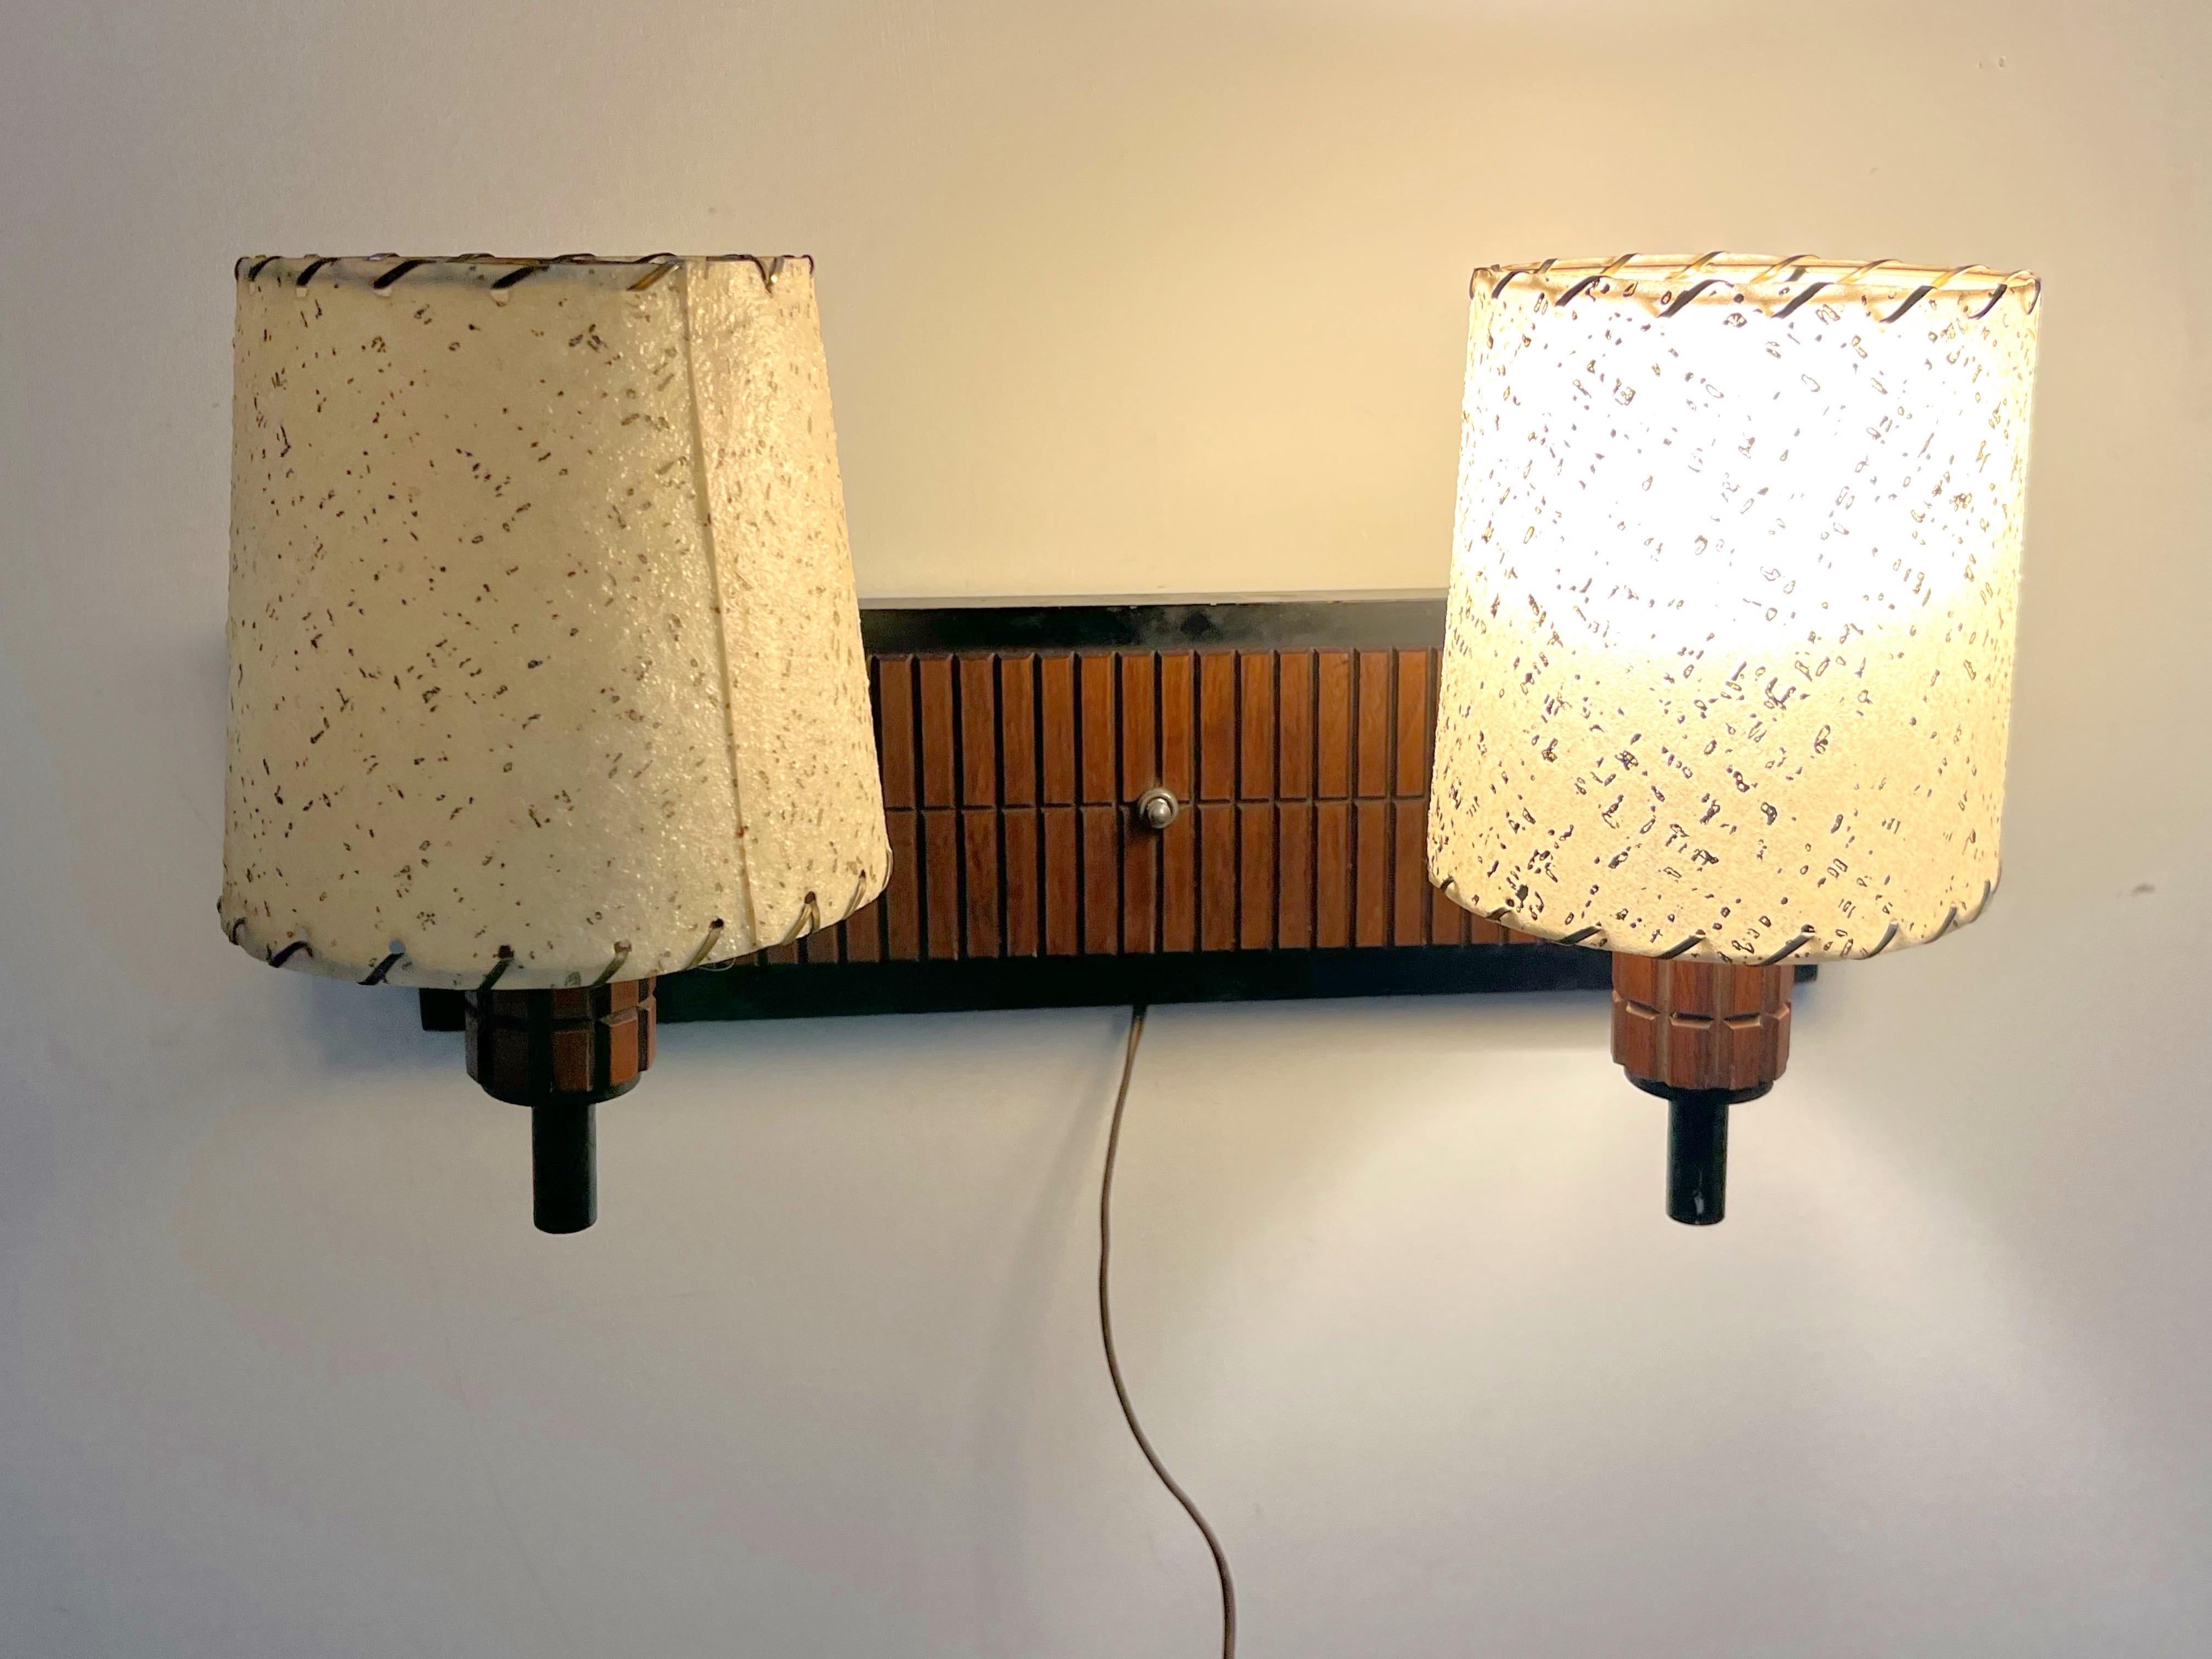 Vintage Double Wall Sconce in Walnut and Metal With Fiberglass Shades.  Great for a reading nook. 
The measurements below are with the shades on.